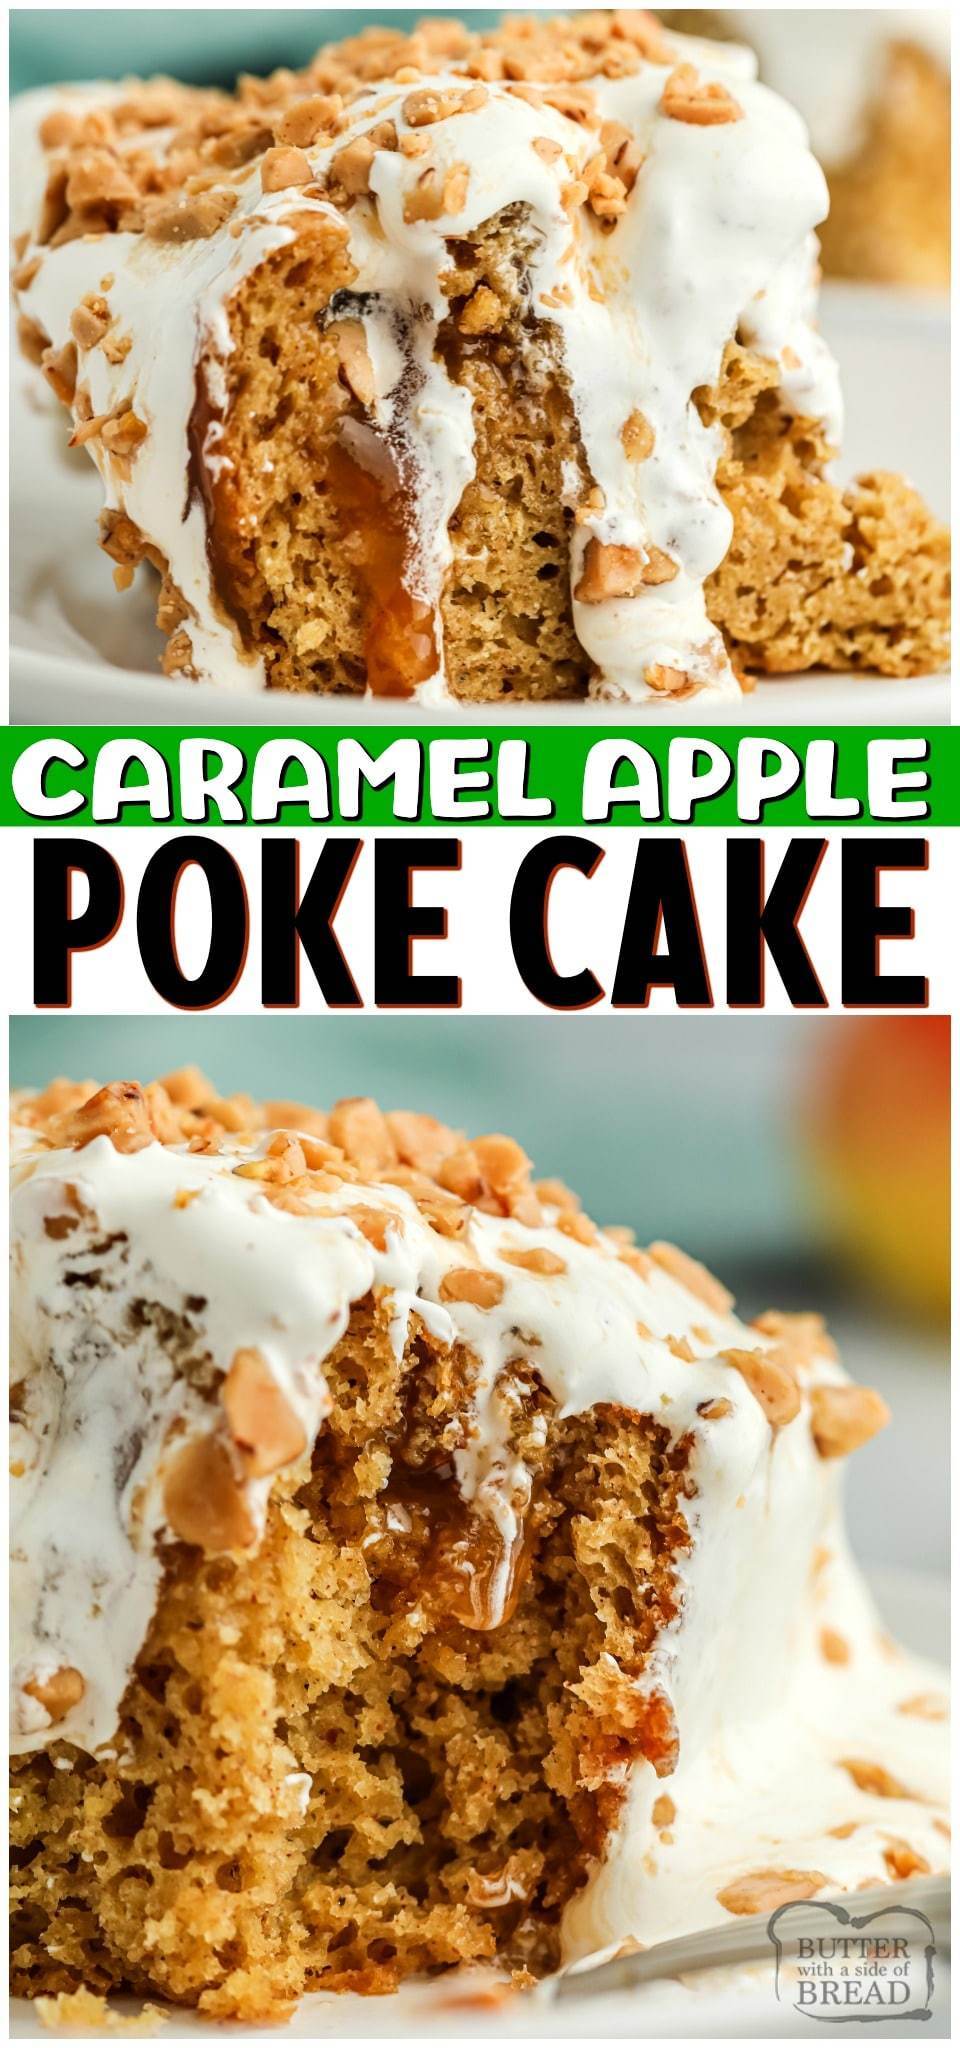 Caramel Apple Poke Cake made with spiced cake mix, applesauce and topped with caramel, sweet cream & toffee! Perfect poke cake recipe for Fall!